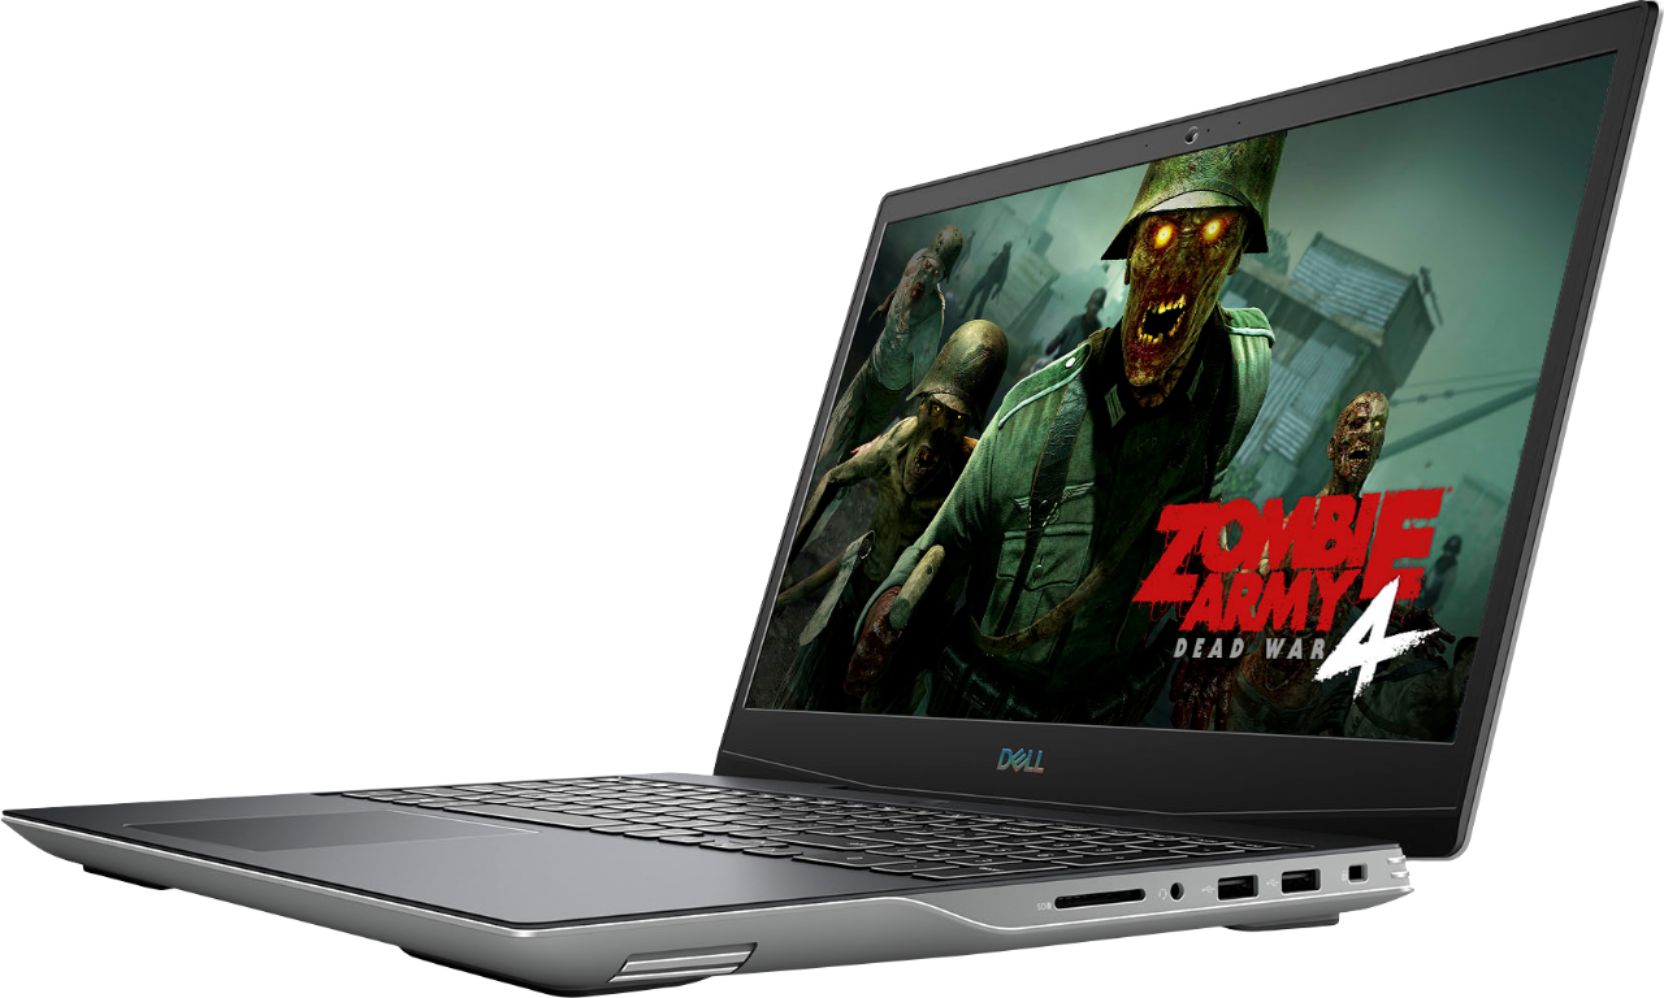 Left View: Dell - G5 15.6" FHD Gaming Laptop - AMD Ryzen 5 - 8GB Memory - AMD Radeon RX 5600M - 256GB Solid State Drive - grey